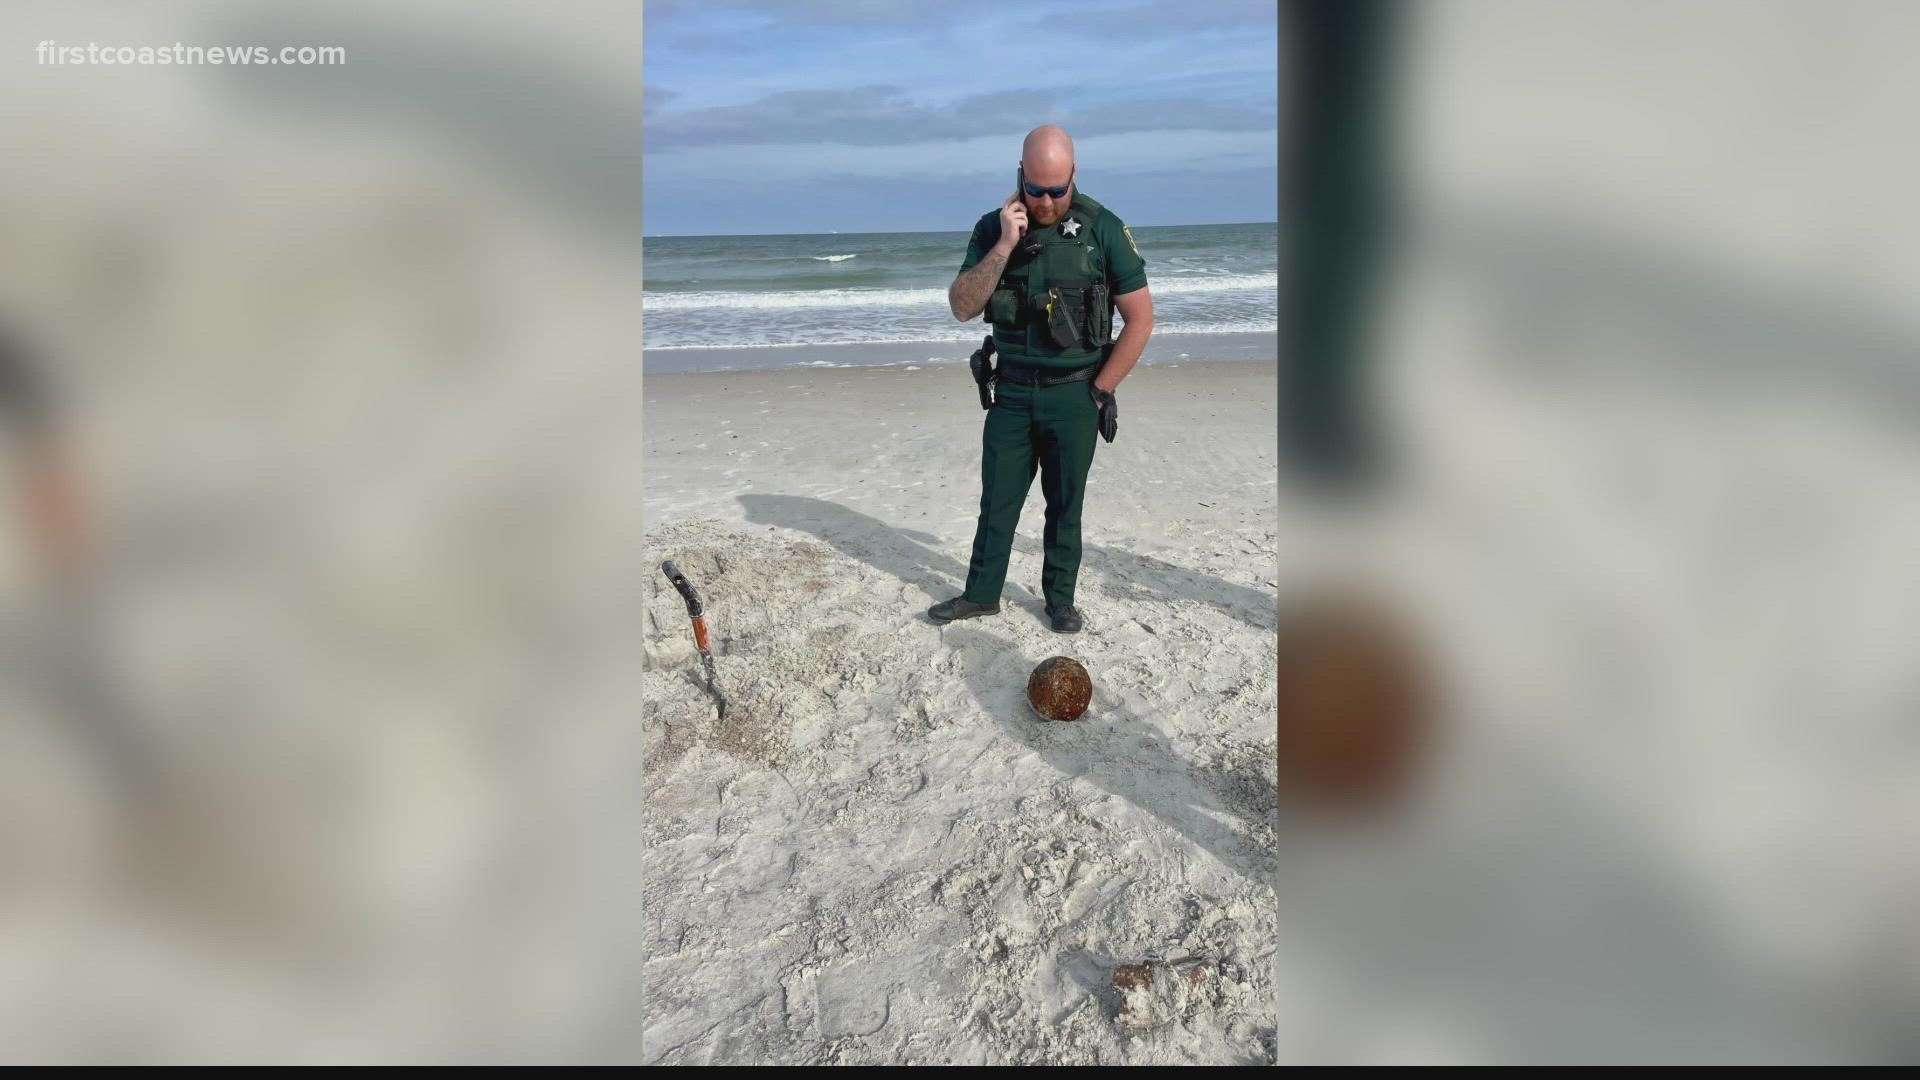 The St. Johns County Sheriff's Office came out and detonated it.